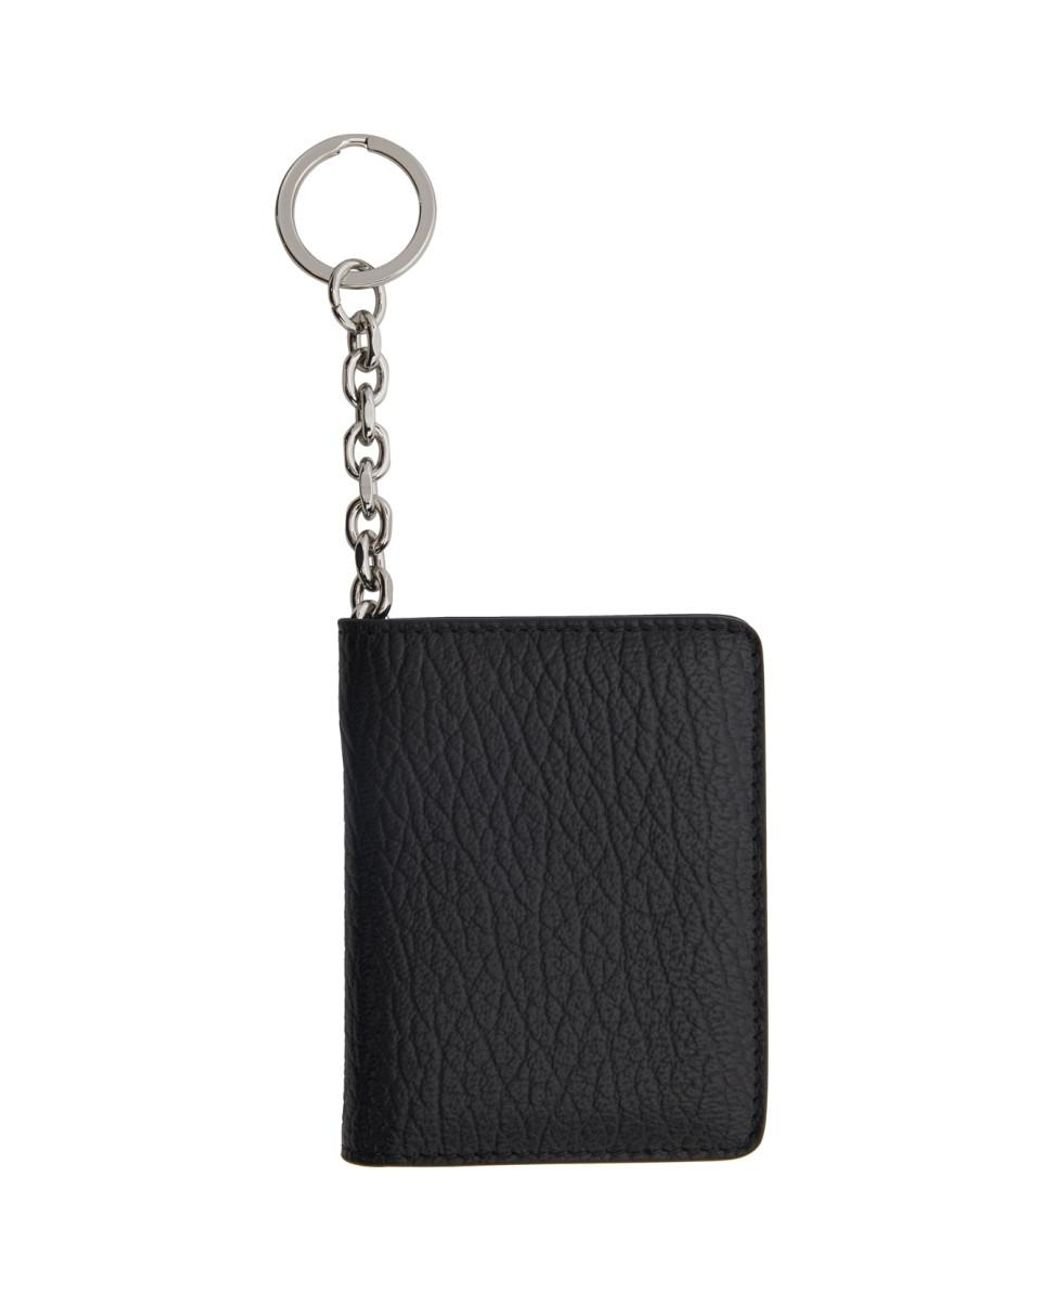 Maison Margiela Leather Wallet in Black - Save 19% - Lyst